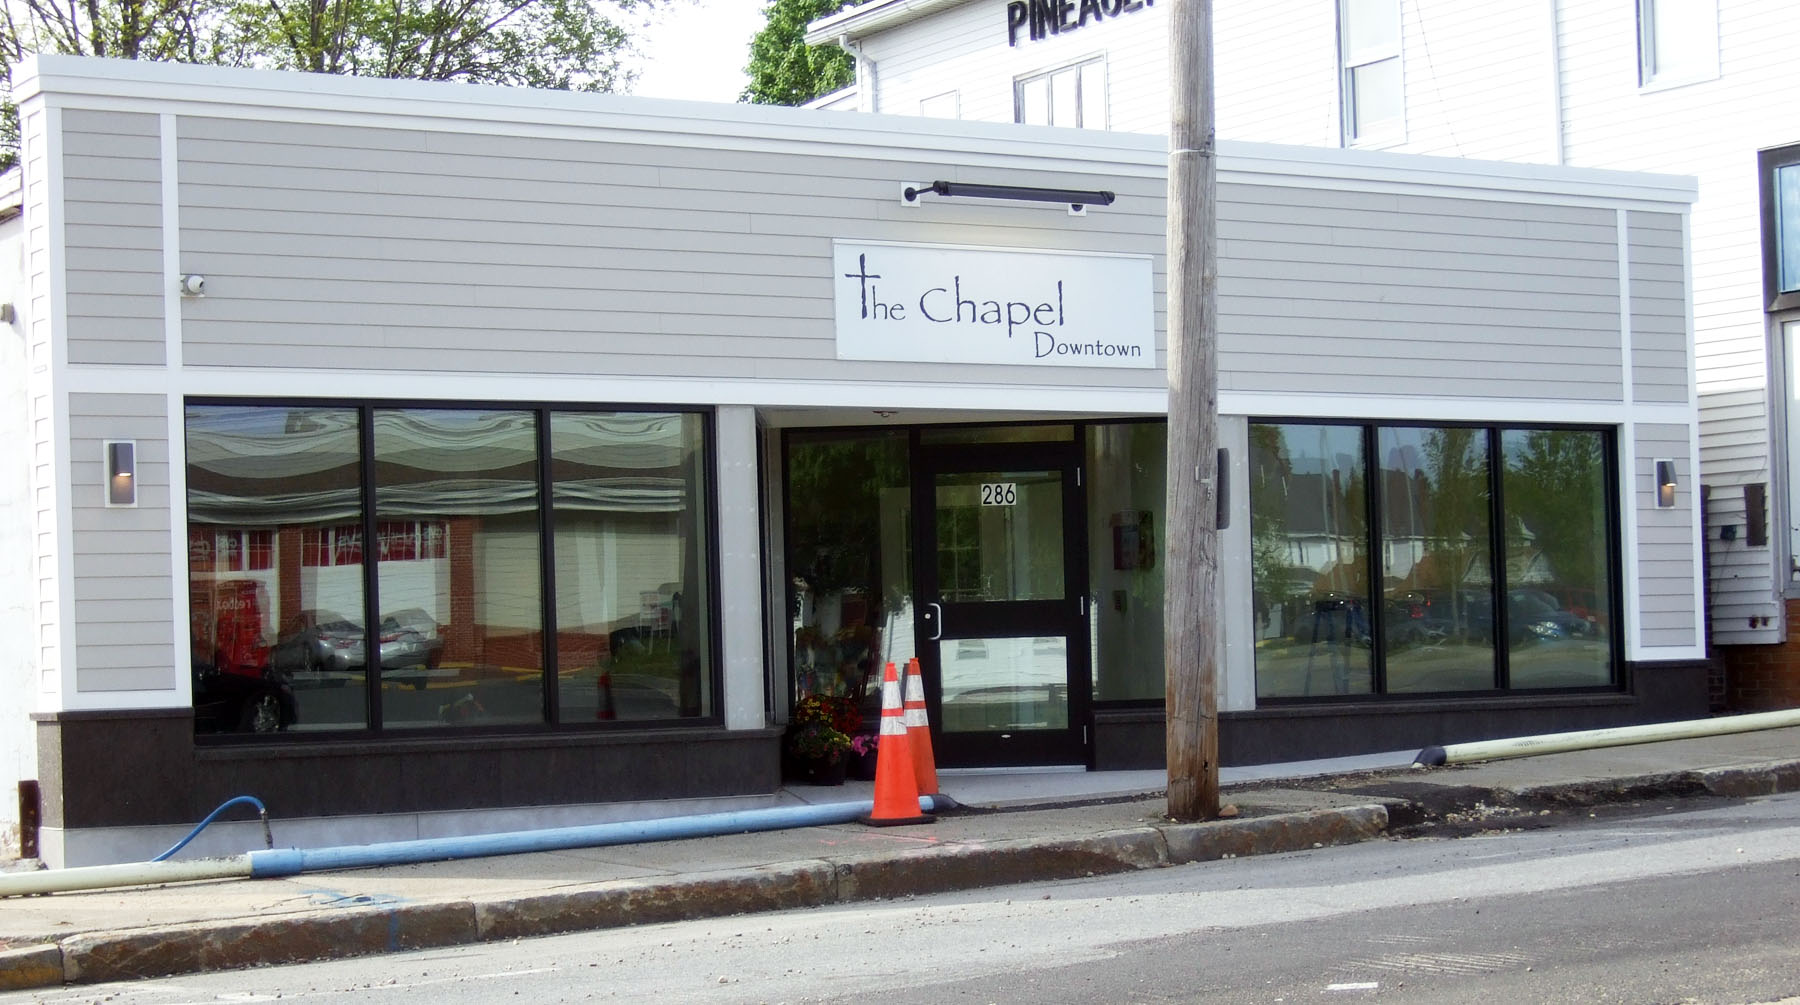 The Chapel Downtown